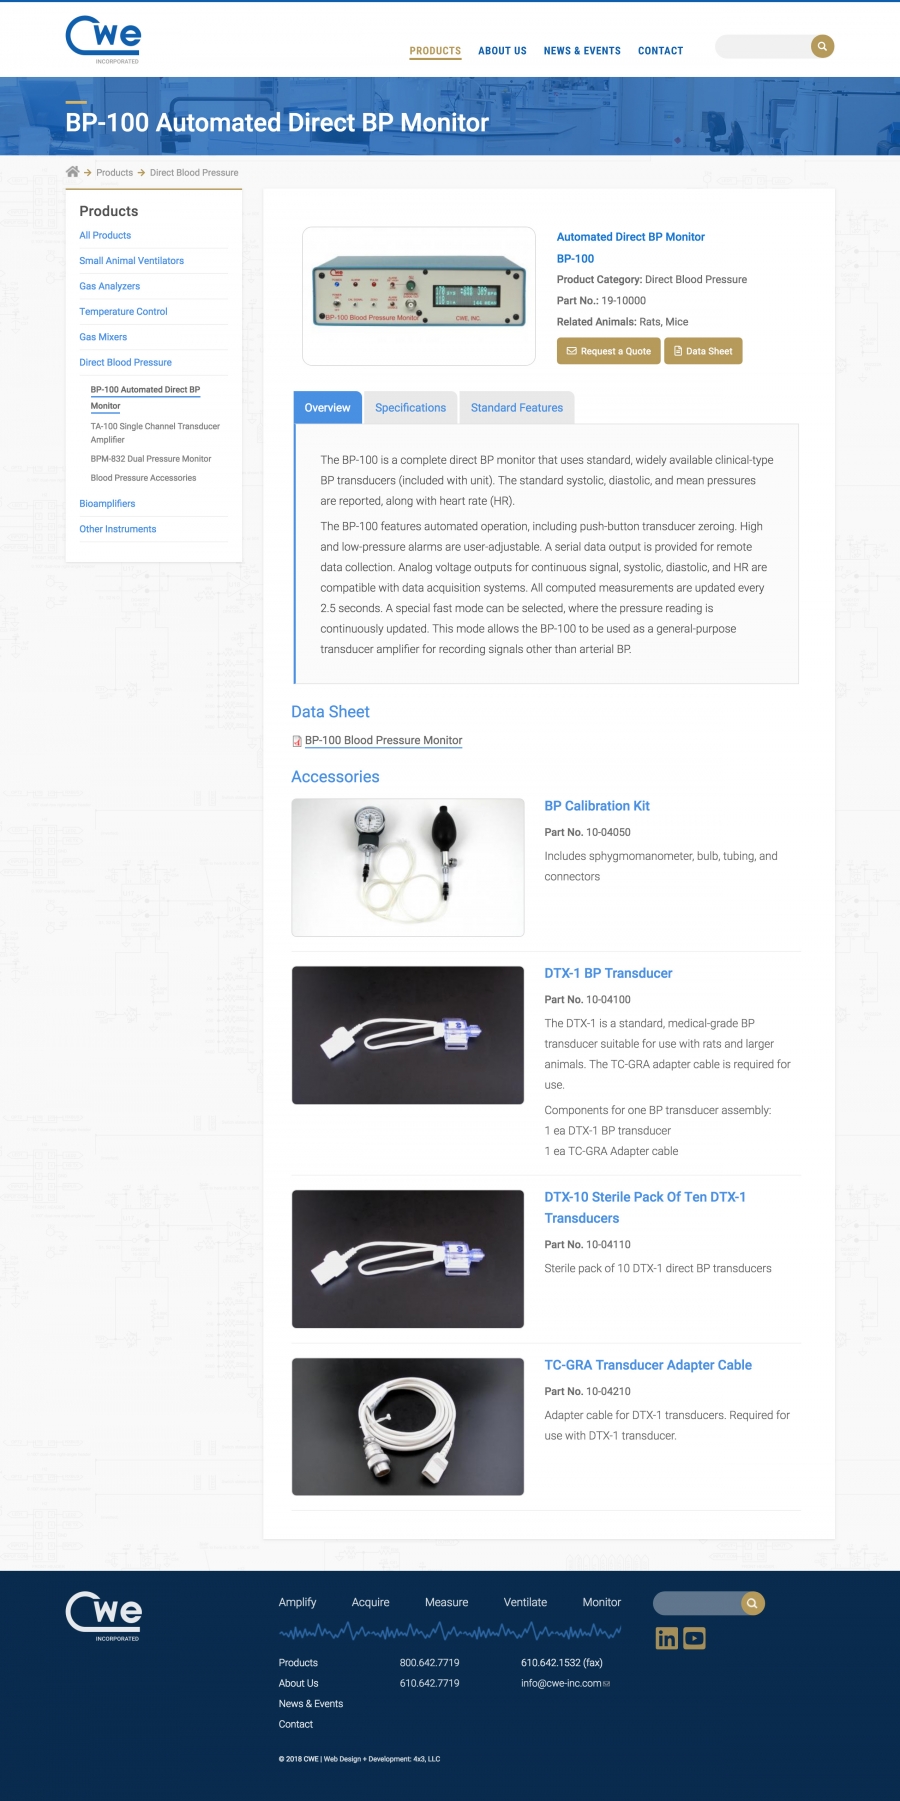 CWE Product Page is fully functional, organized, easy to manage in a SEO-friendly